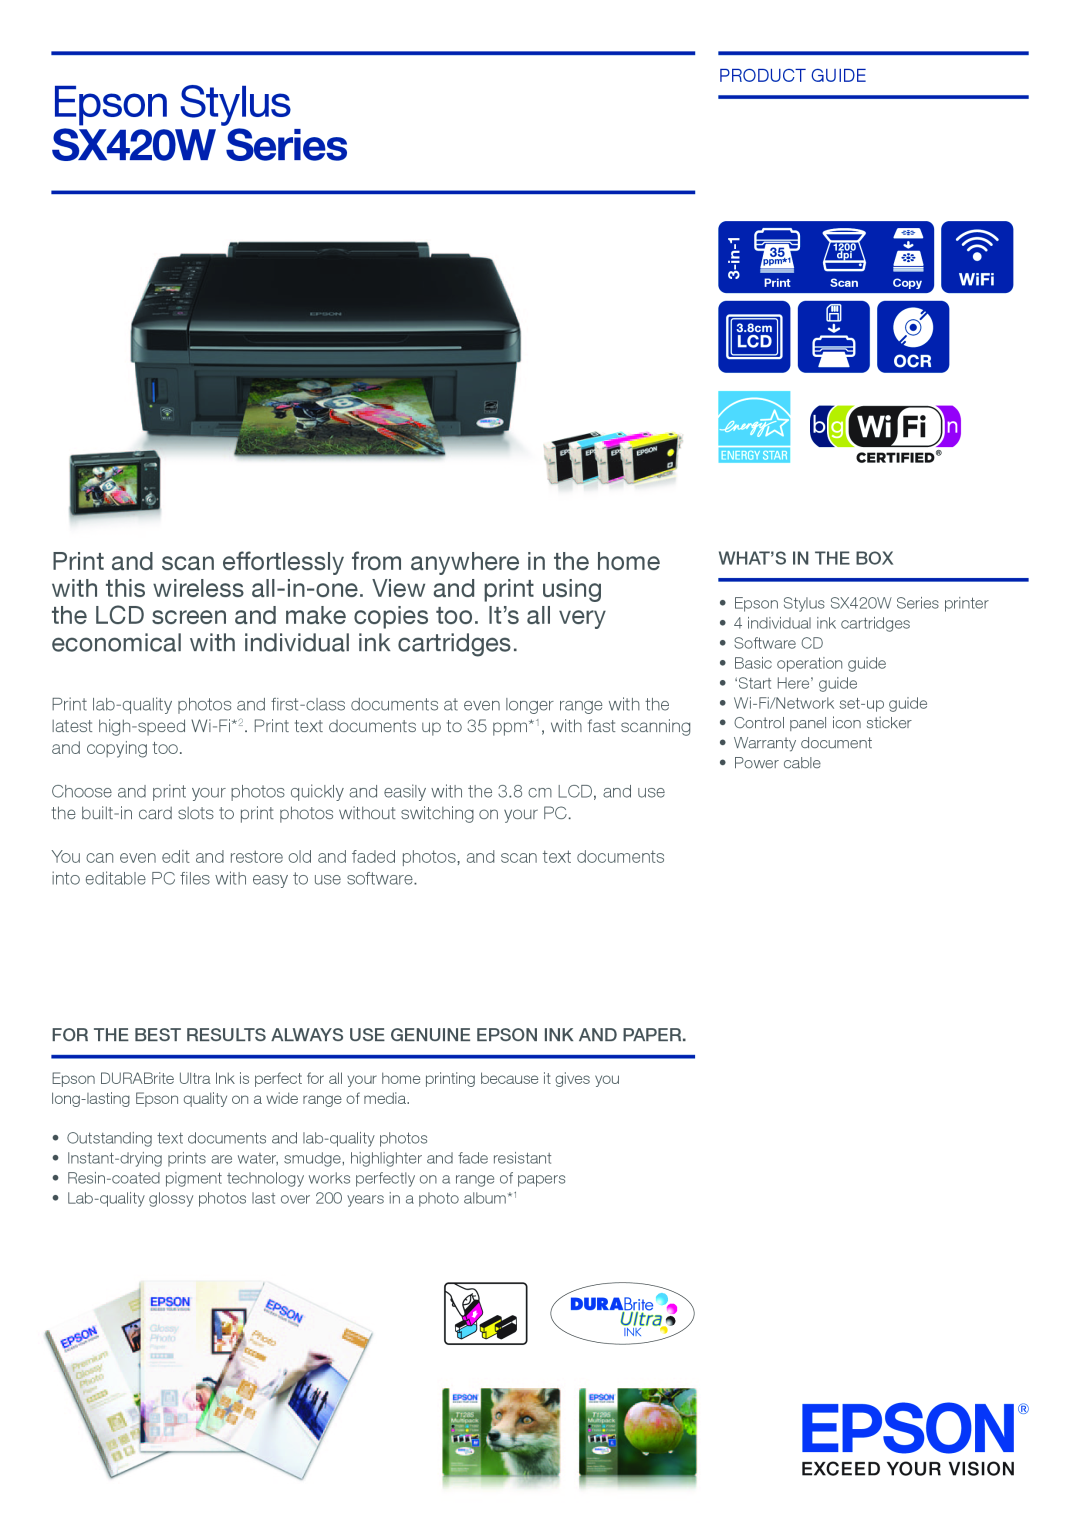 Epson setup guide Product Guide, Epson Stylus, SX420W Series 